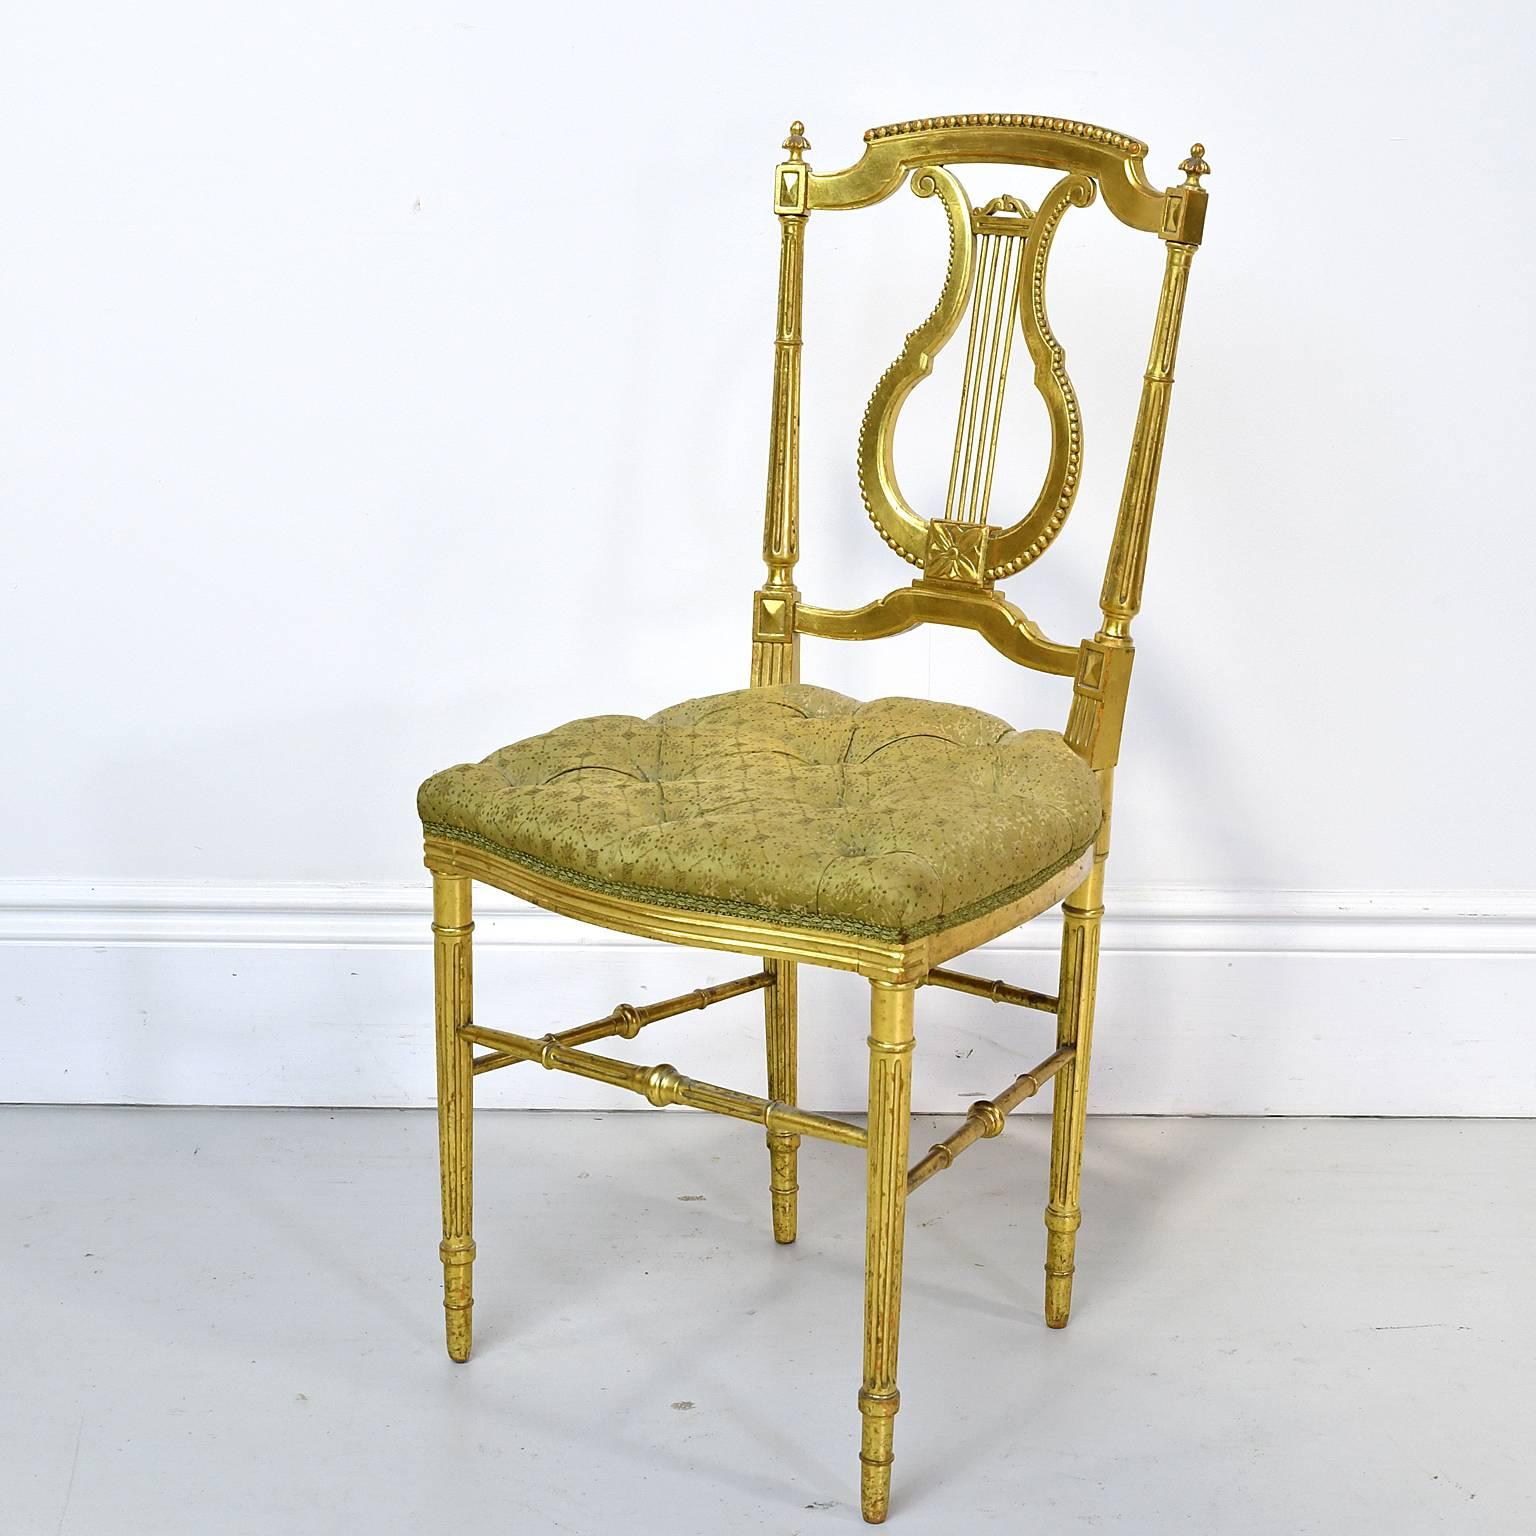 From pre-WWI France, during the Belle Époque period, a very beautiful & fine Louis XVI-style salon chair in giltwood (gold leaf applied over wood) with carved lyre-back, turned and reeded legs with turned box stretcher, and bowed-front seat with